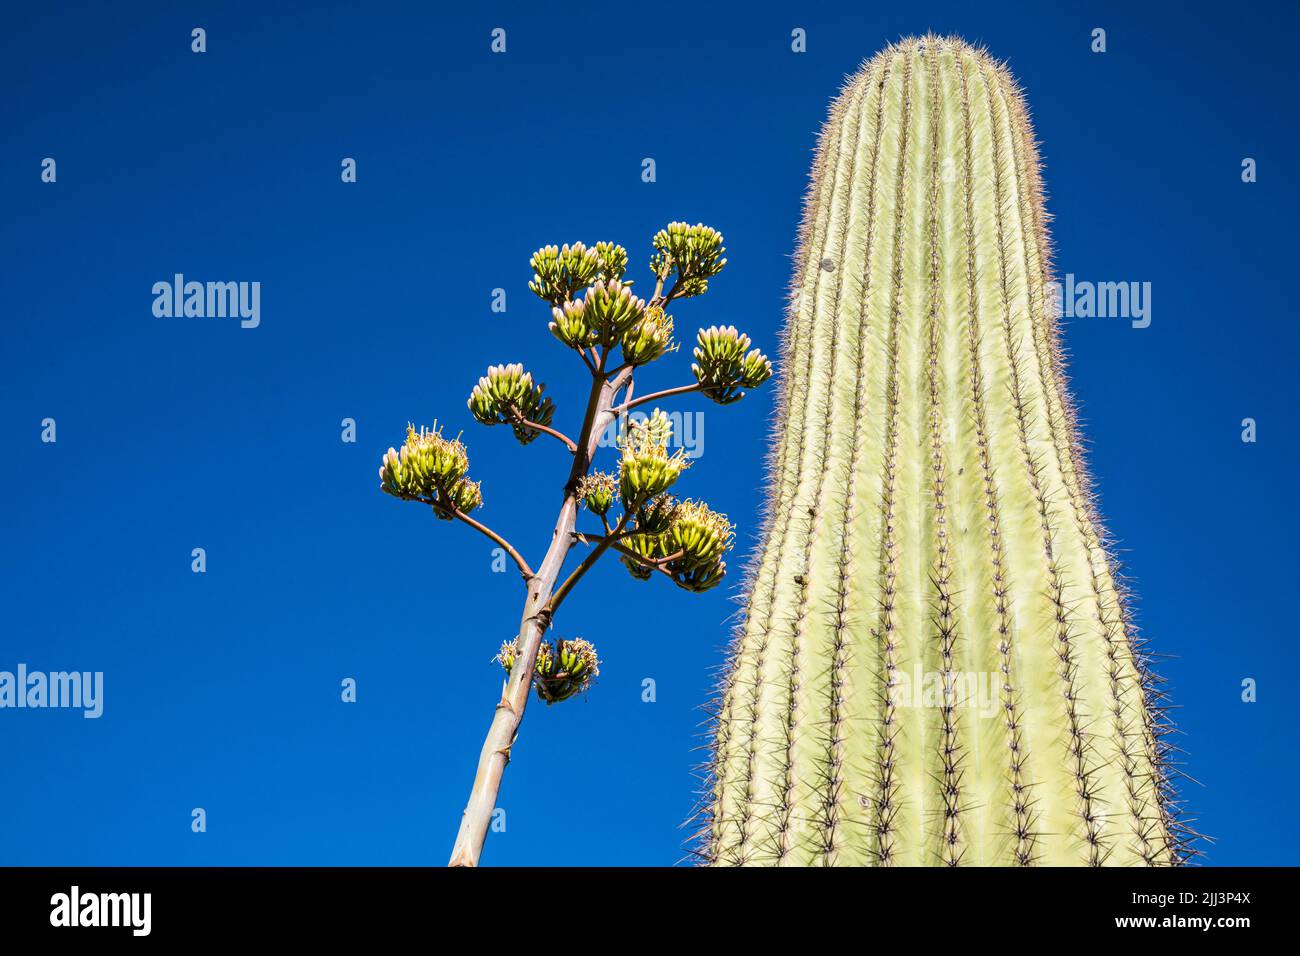 The flowering stalk of a Century Plant next to a Saguaro cactus against a blue sky. Stock Photo